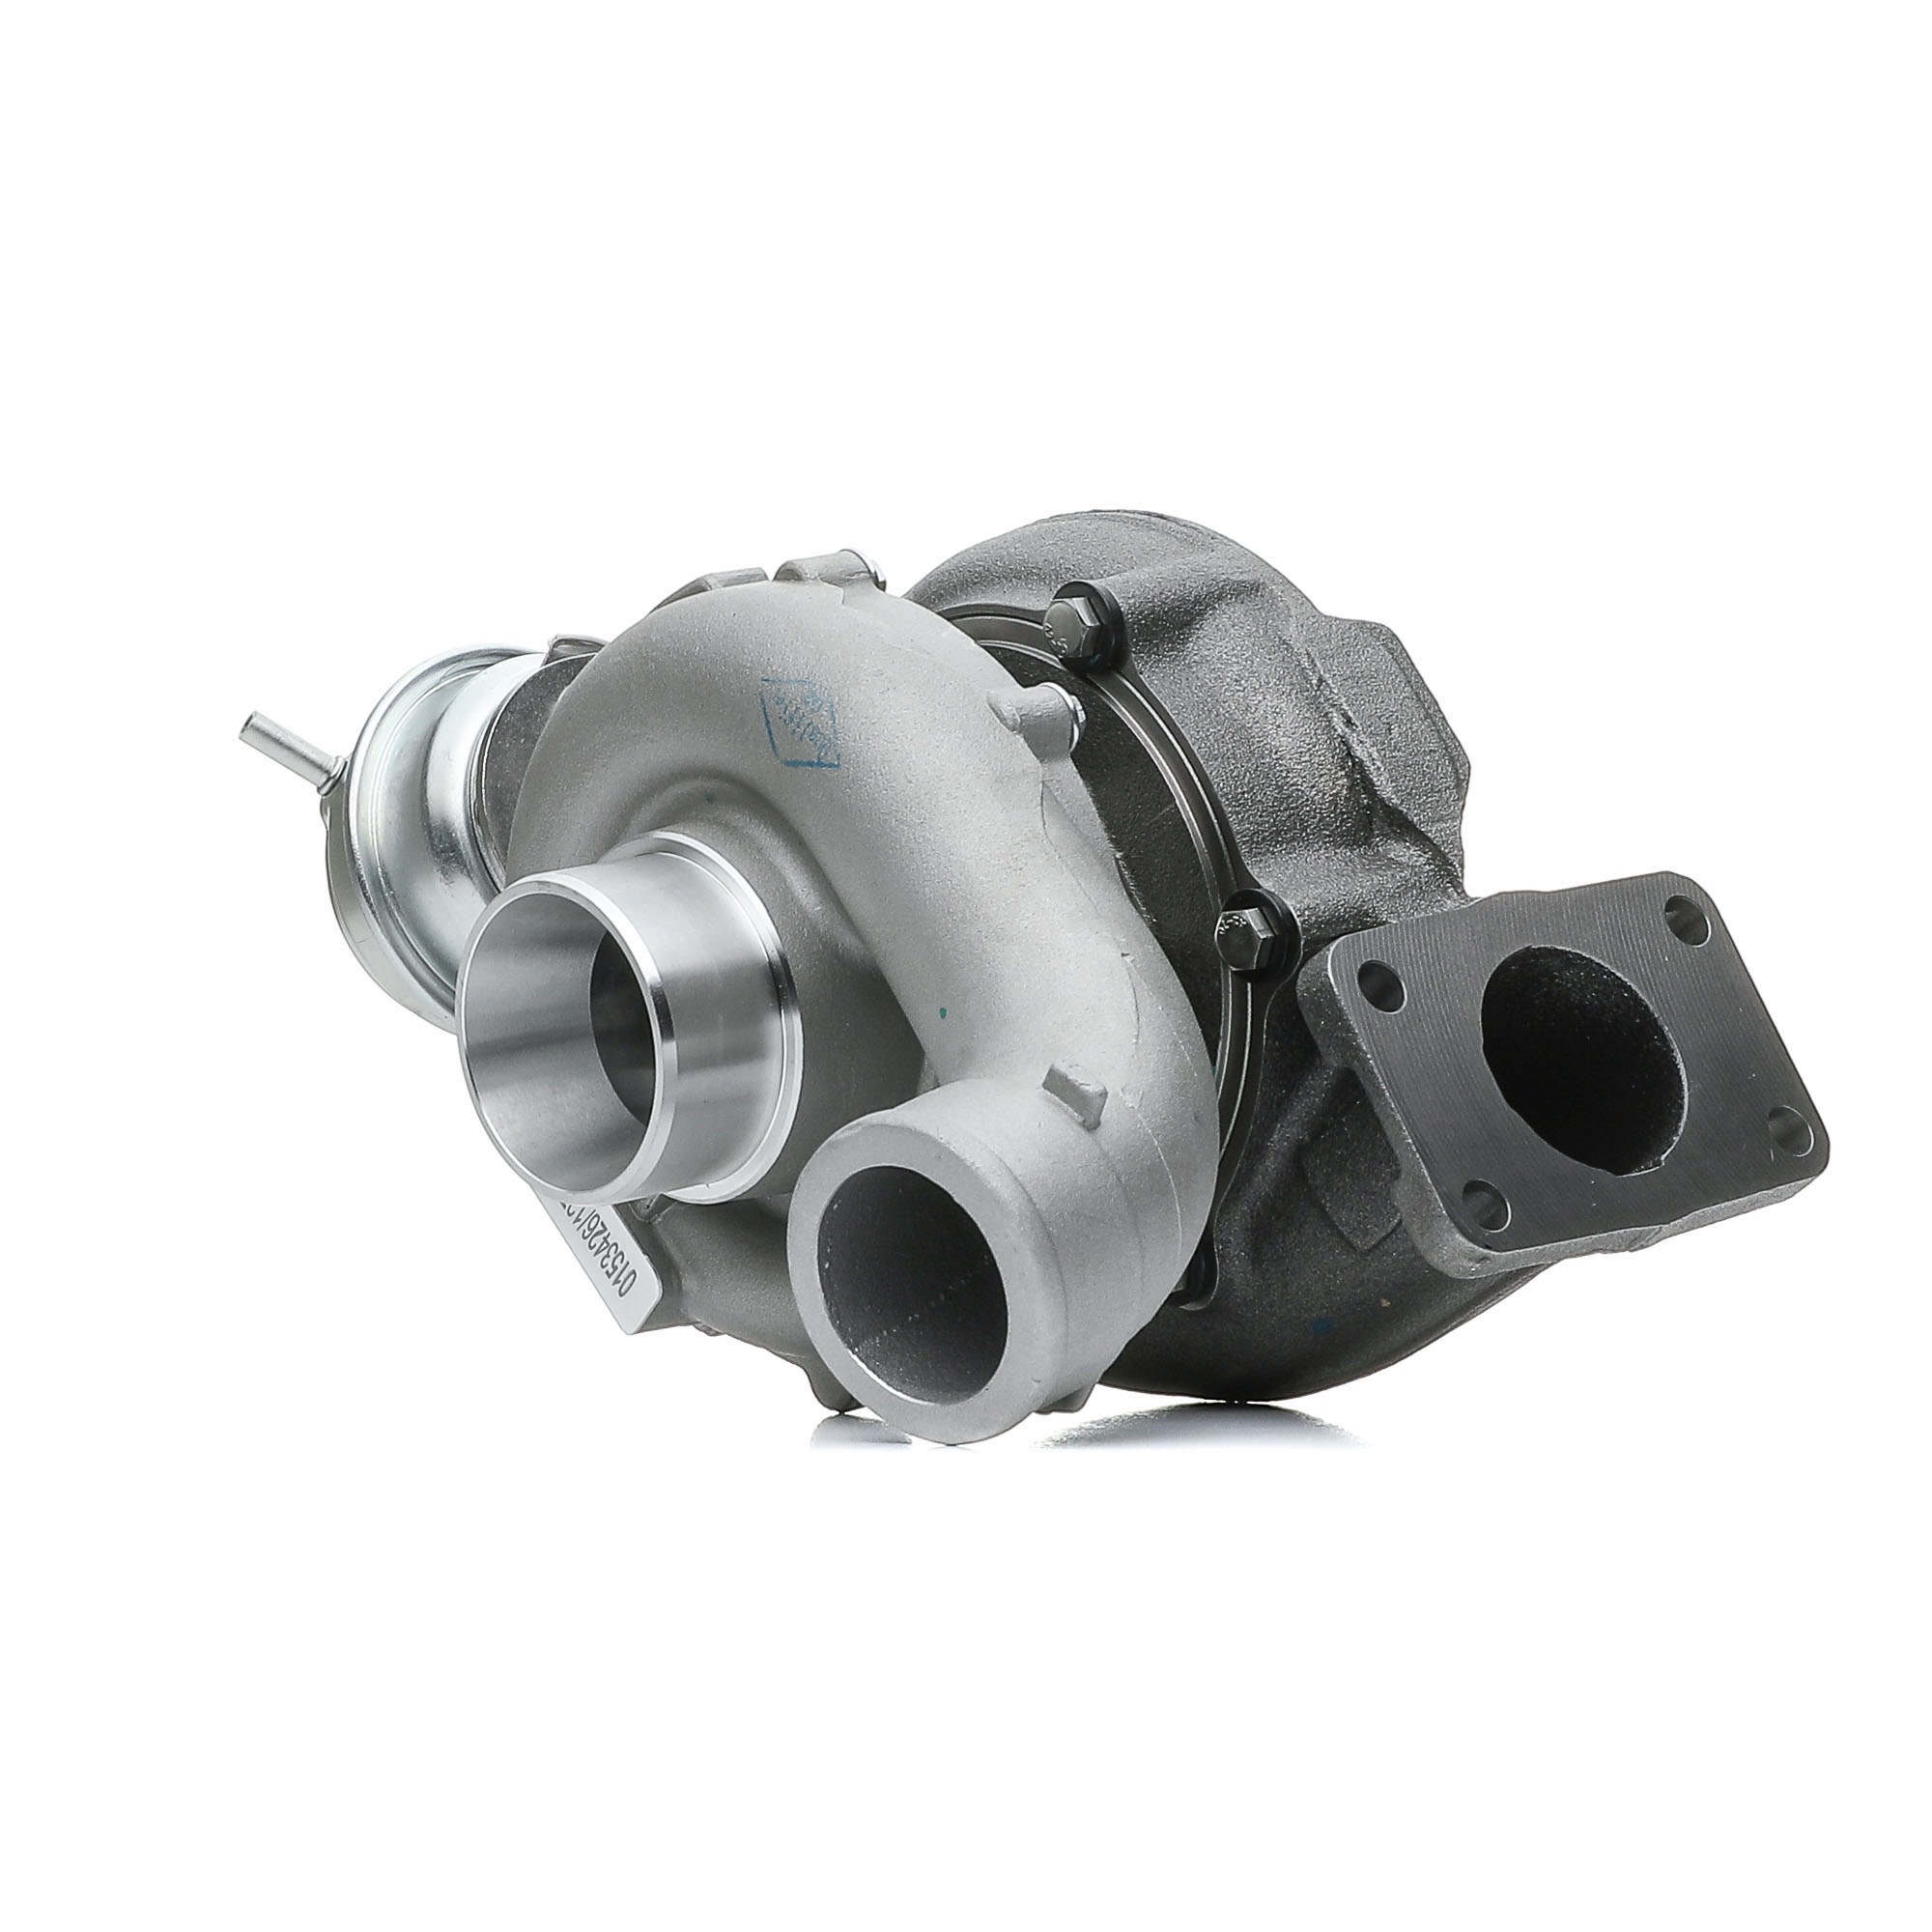 STARK SKCT-1190046 Turbocharger Exhaust Turbocharger, Euro 3, Pneumatic, without attachment material